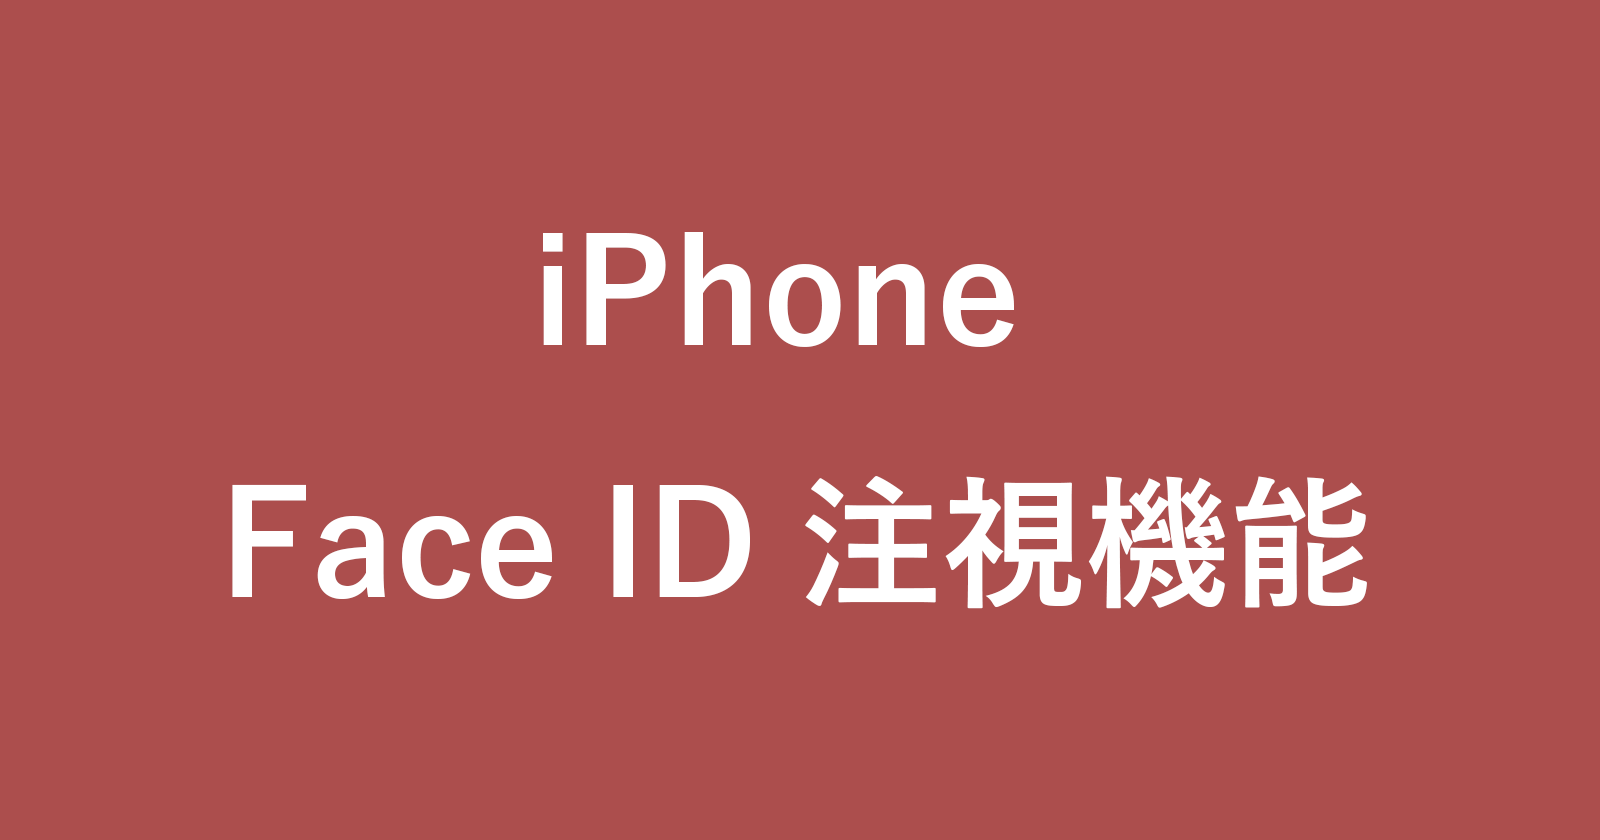 iphone attention face id